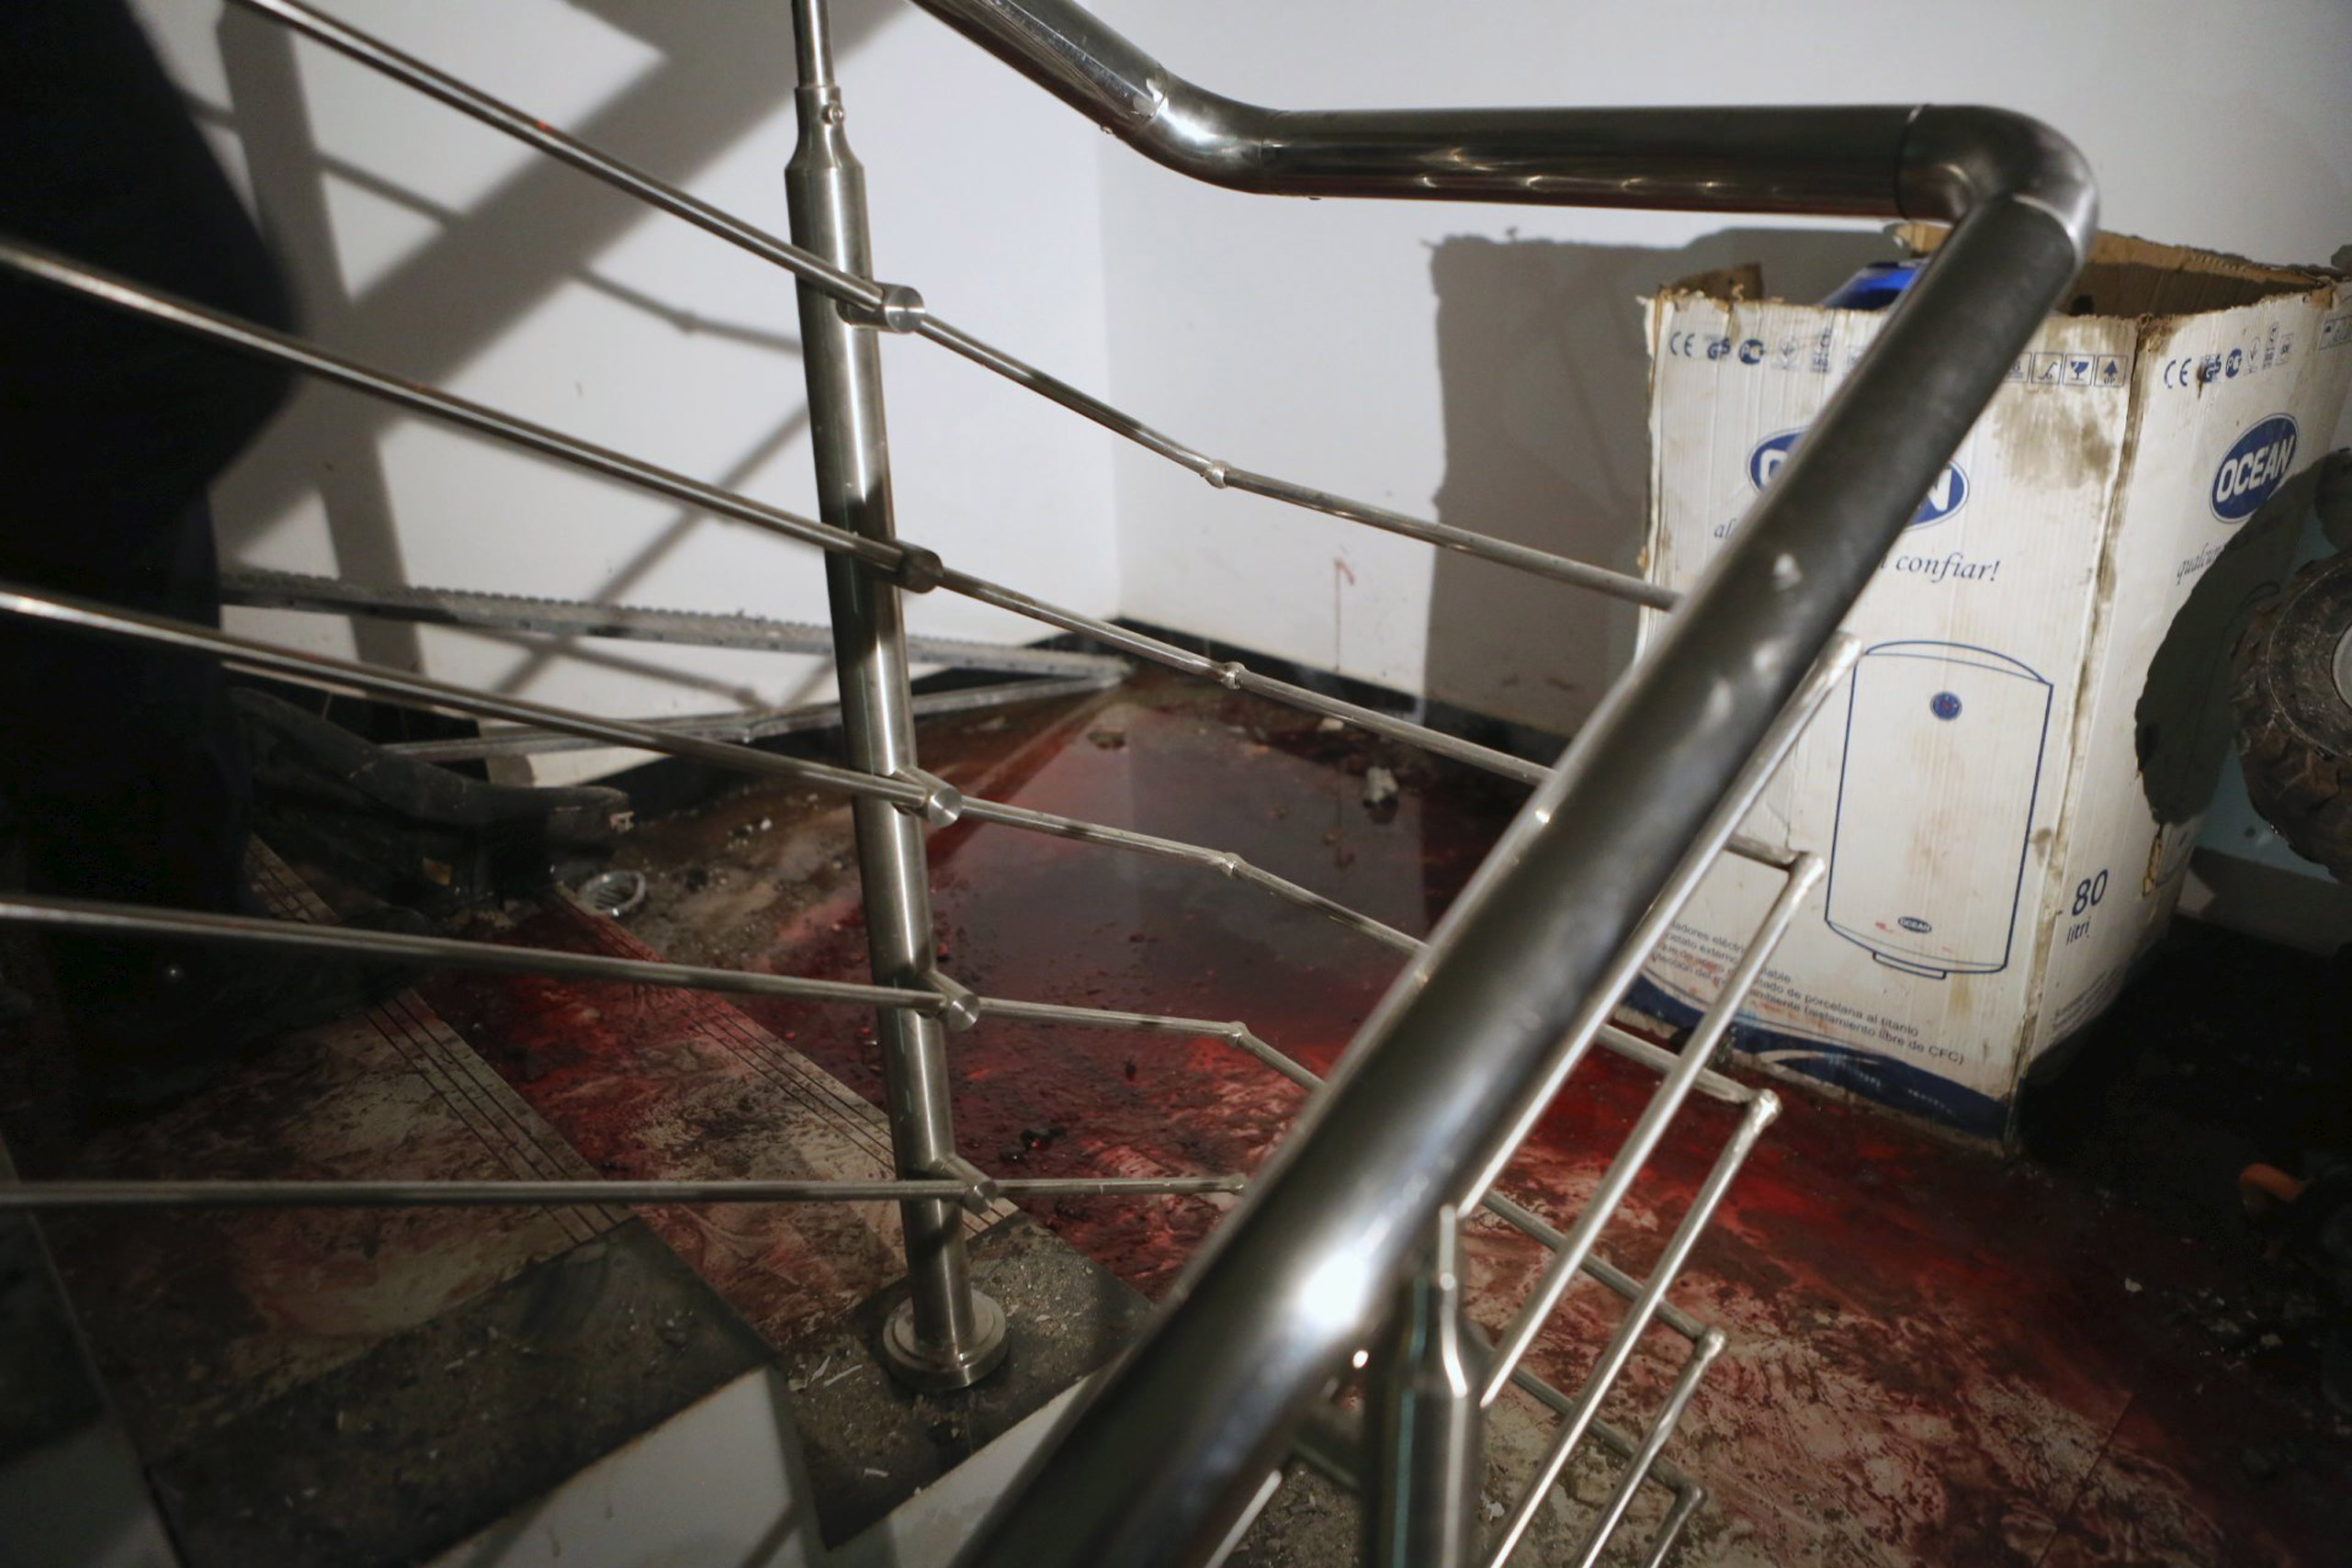 Blood is seen at a staircase of the Radisson hotel in Bamako, Mali, on Nov. 20, 2015.